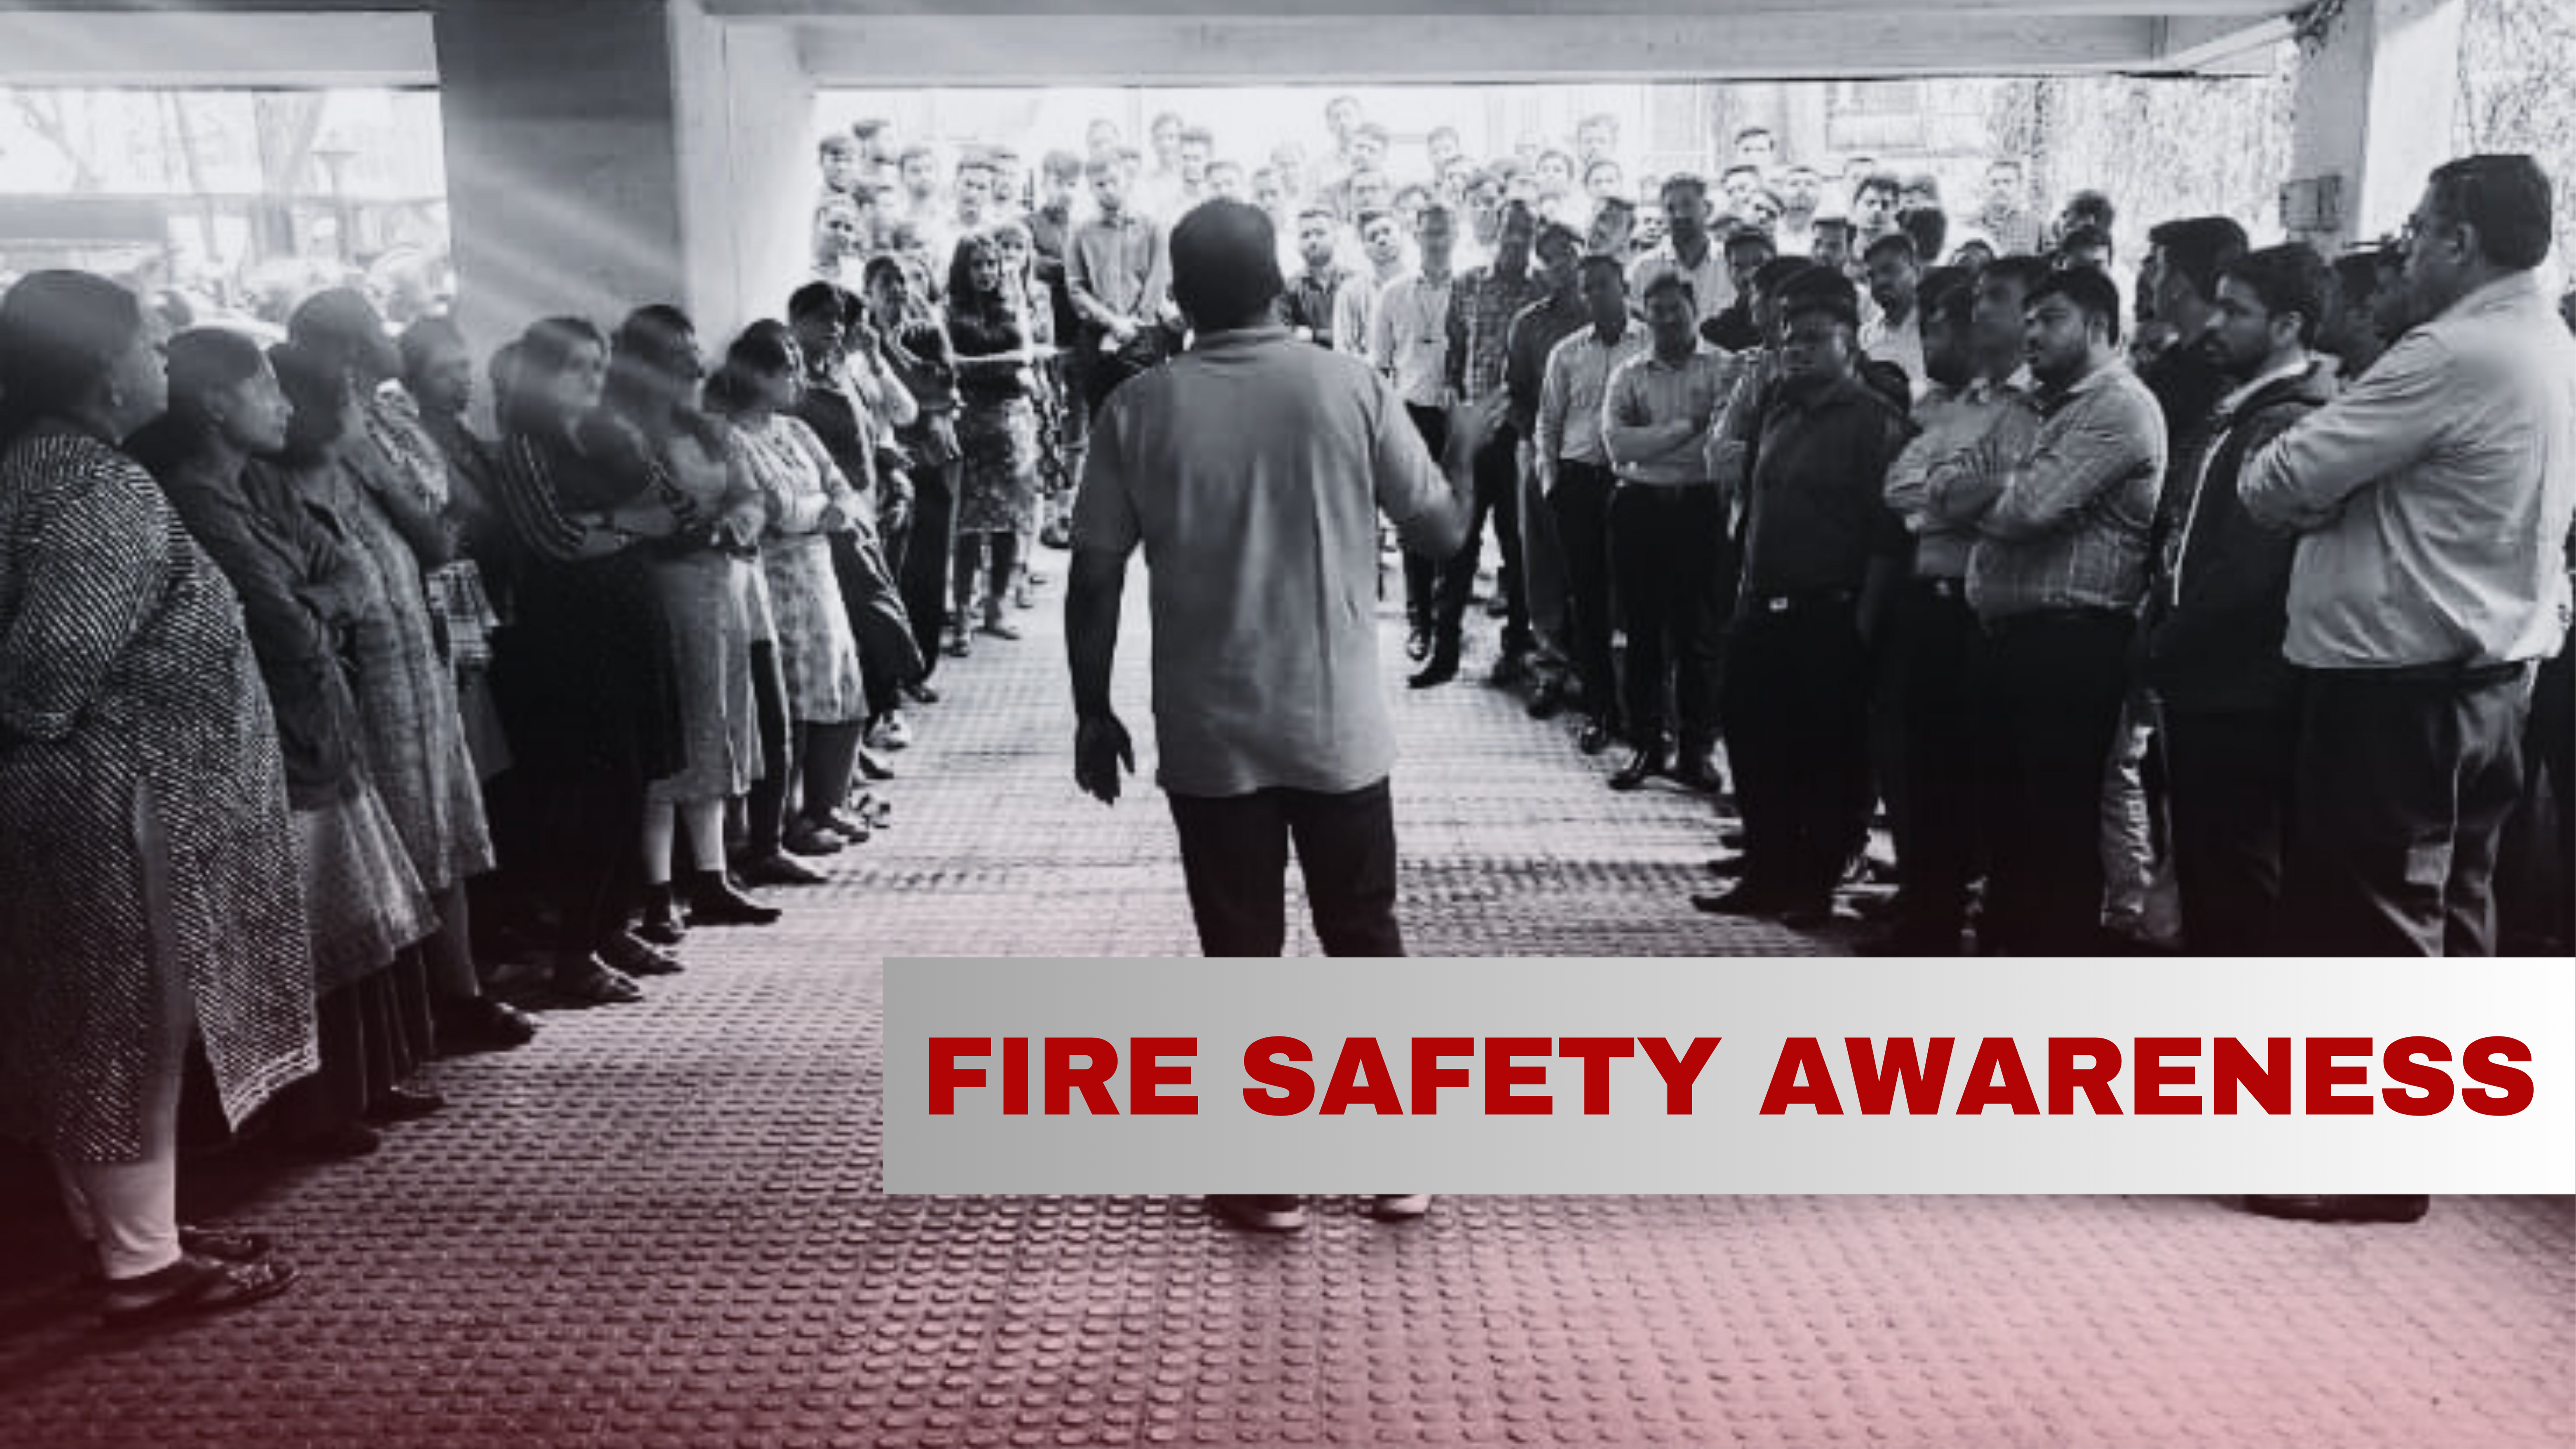 FIRE SAFETY AWARENESS TRAINING - FIRE CHAMPS